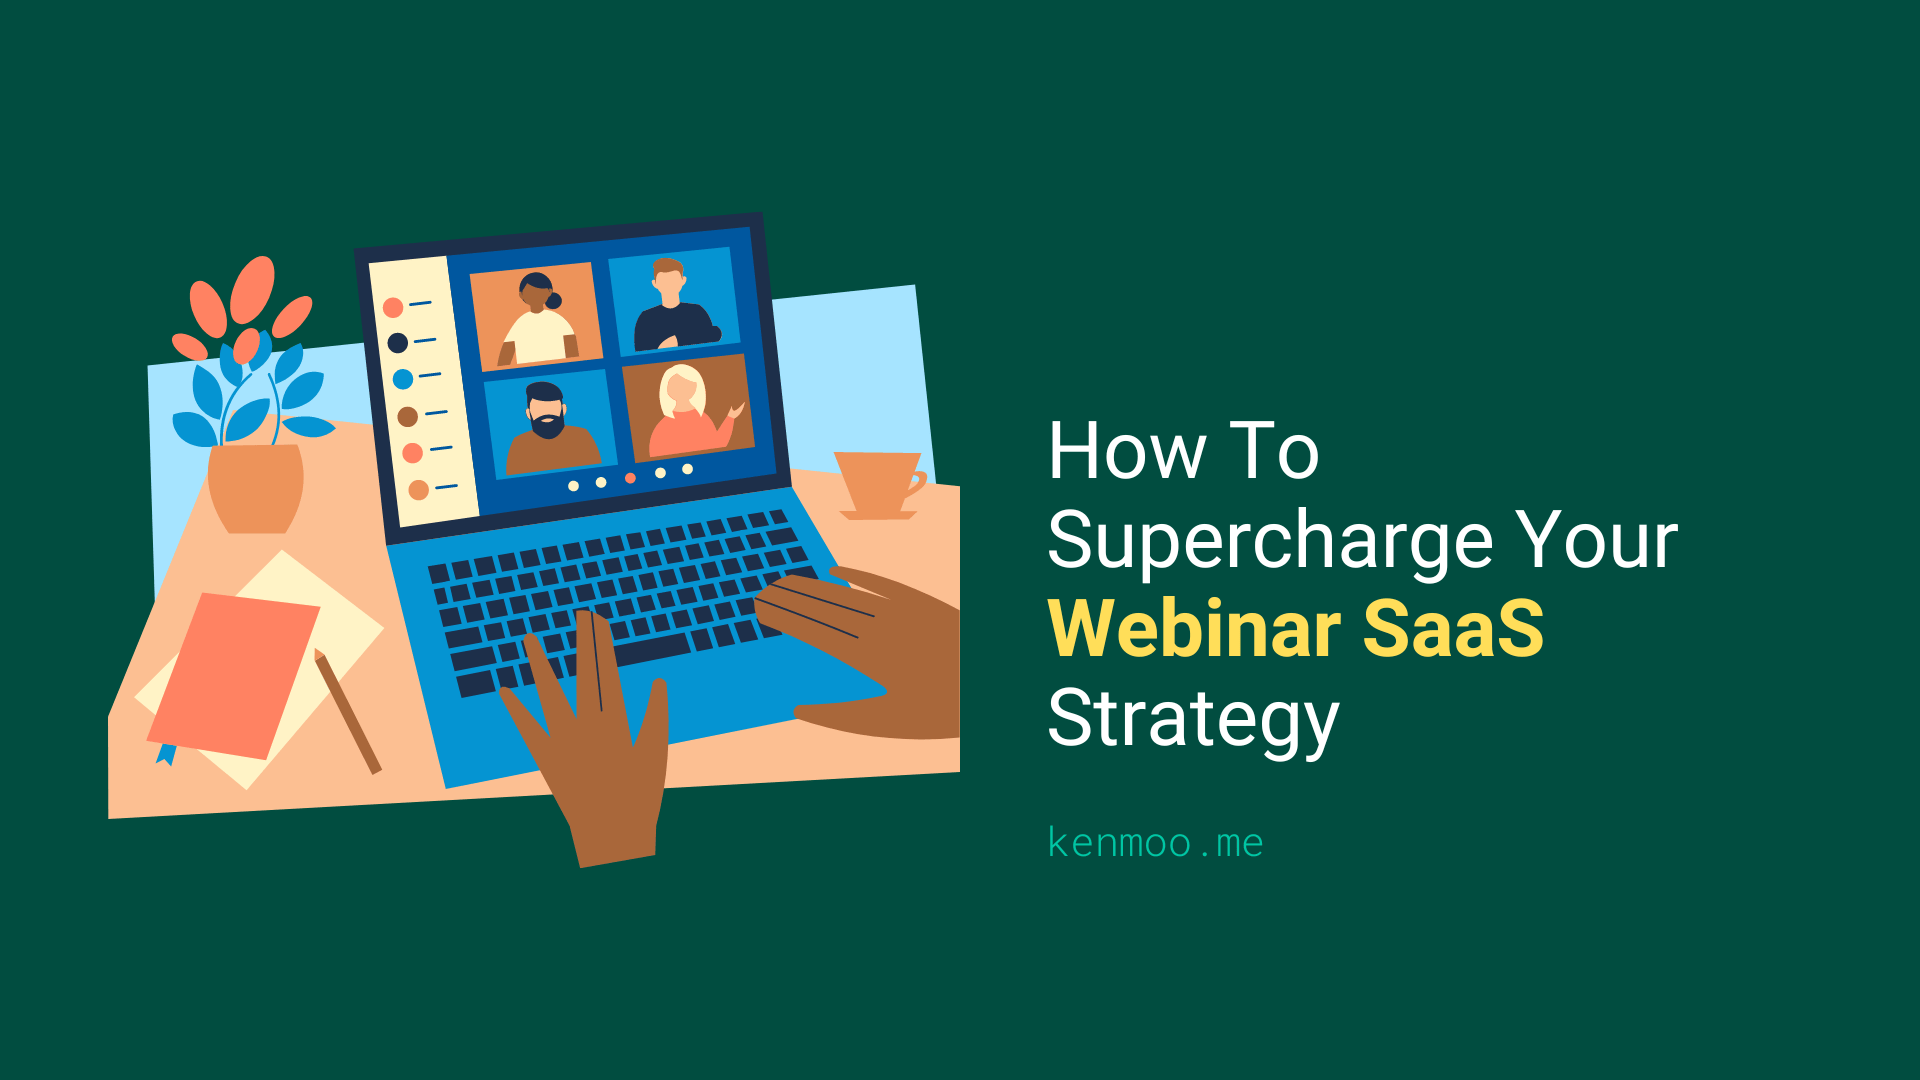 How To Supercharge Your Webinar SaaS Strategy